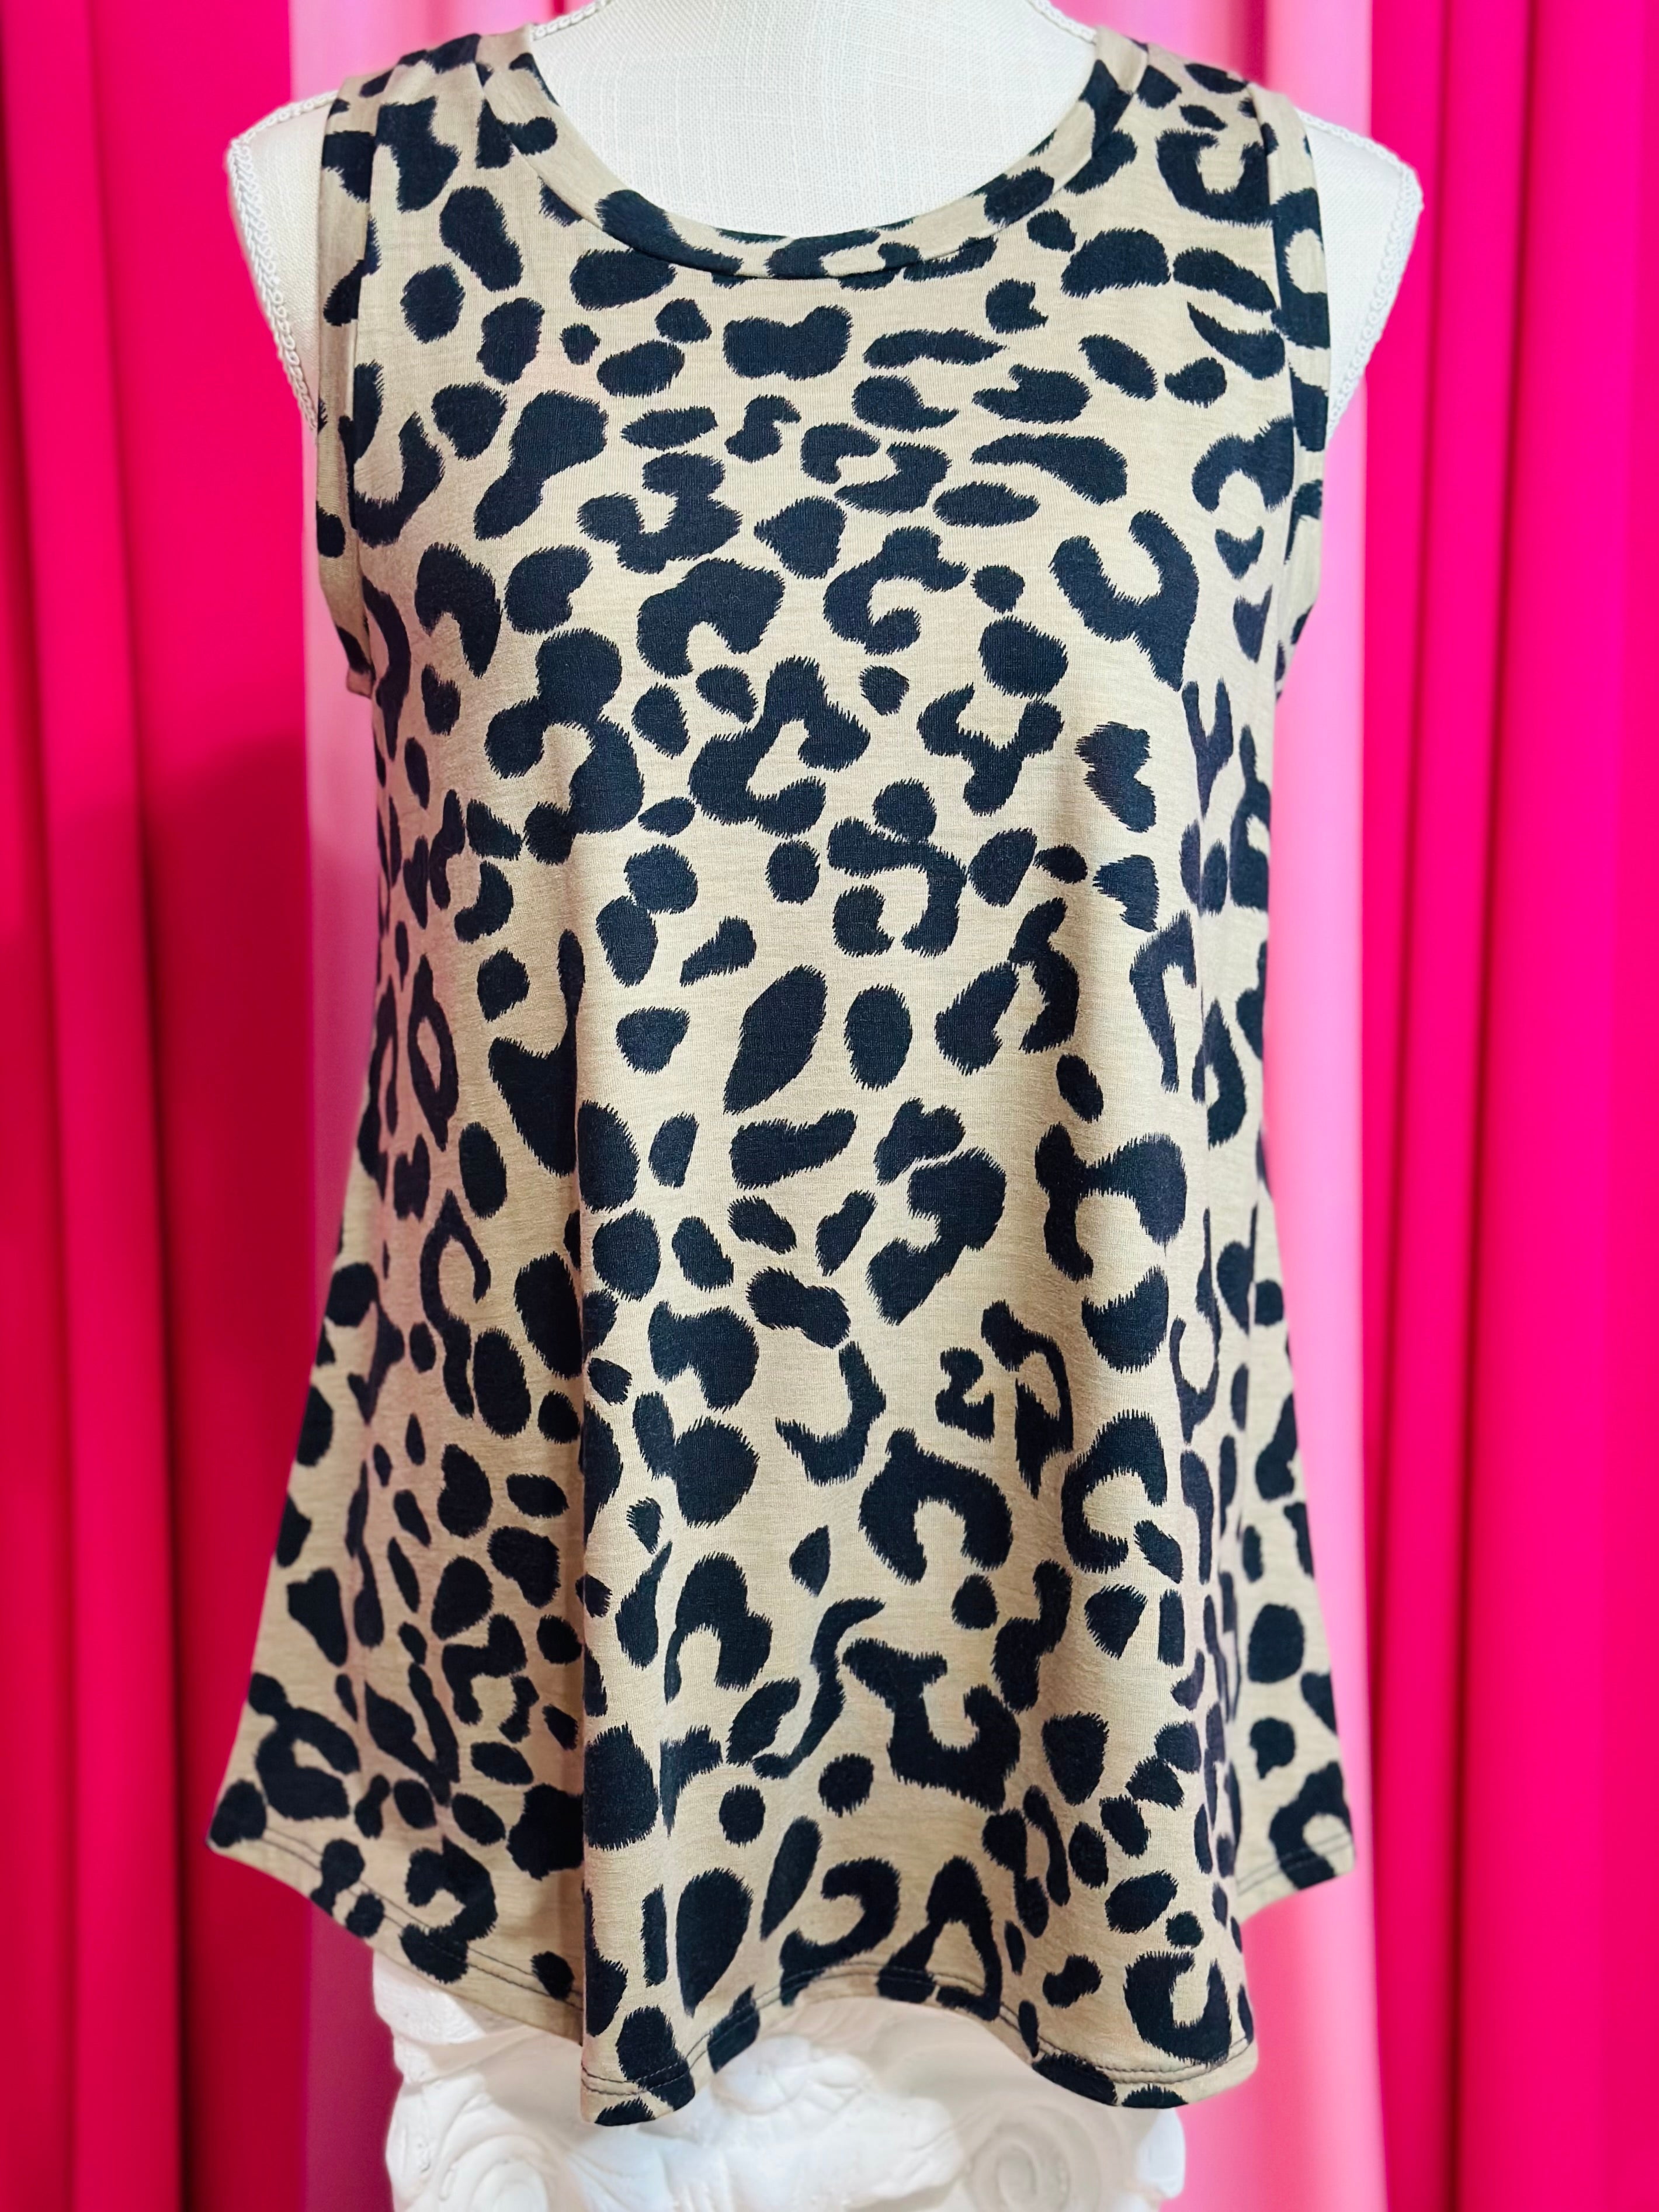 Sleeveless Animal Print Top by Britt and Belle Boutique